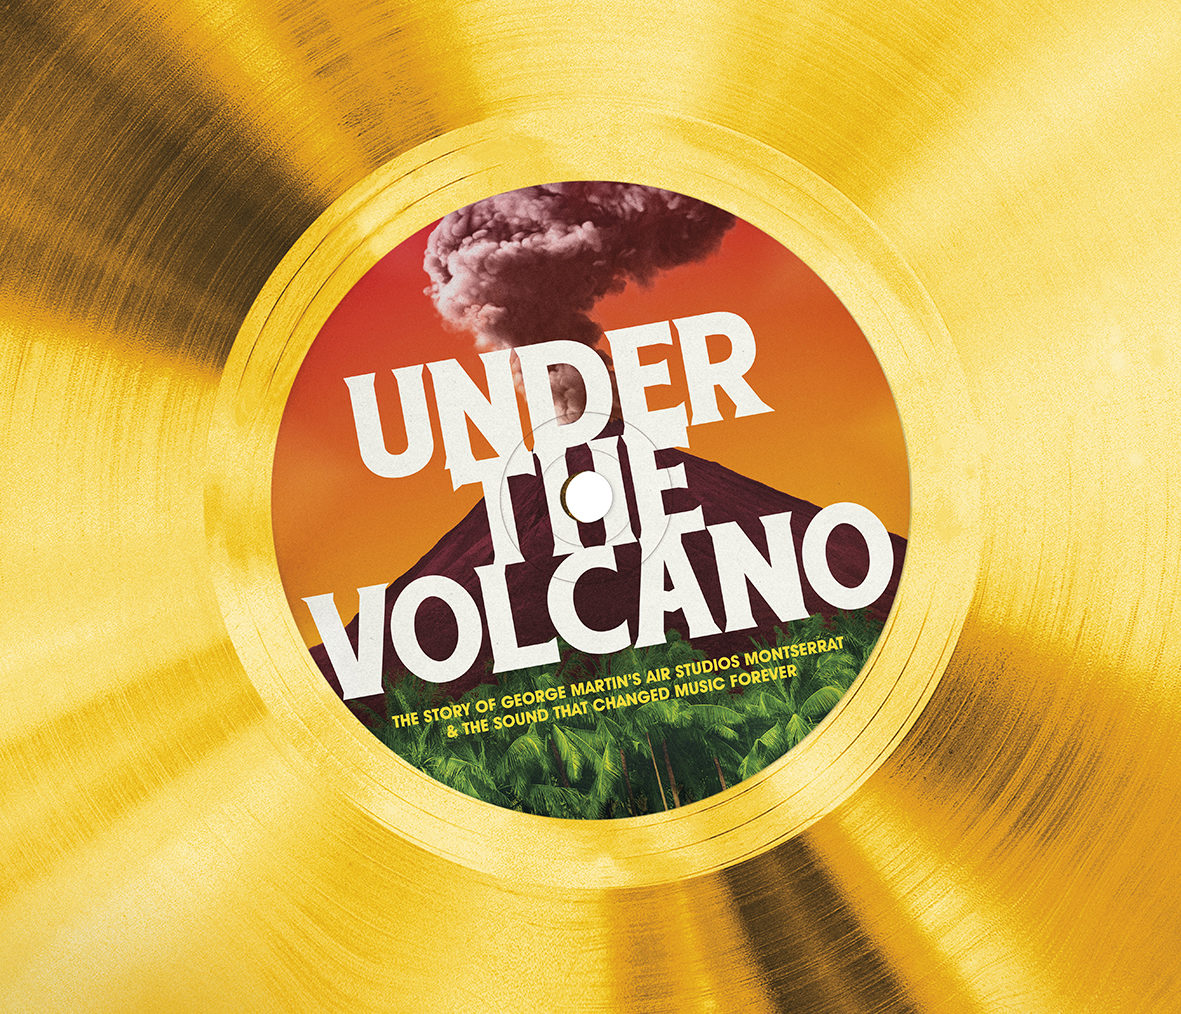 New 80’s Music Documentary ‘Under The Volcano’ Has Release Date